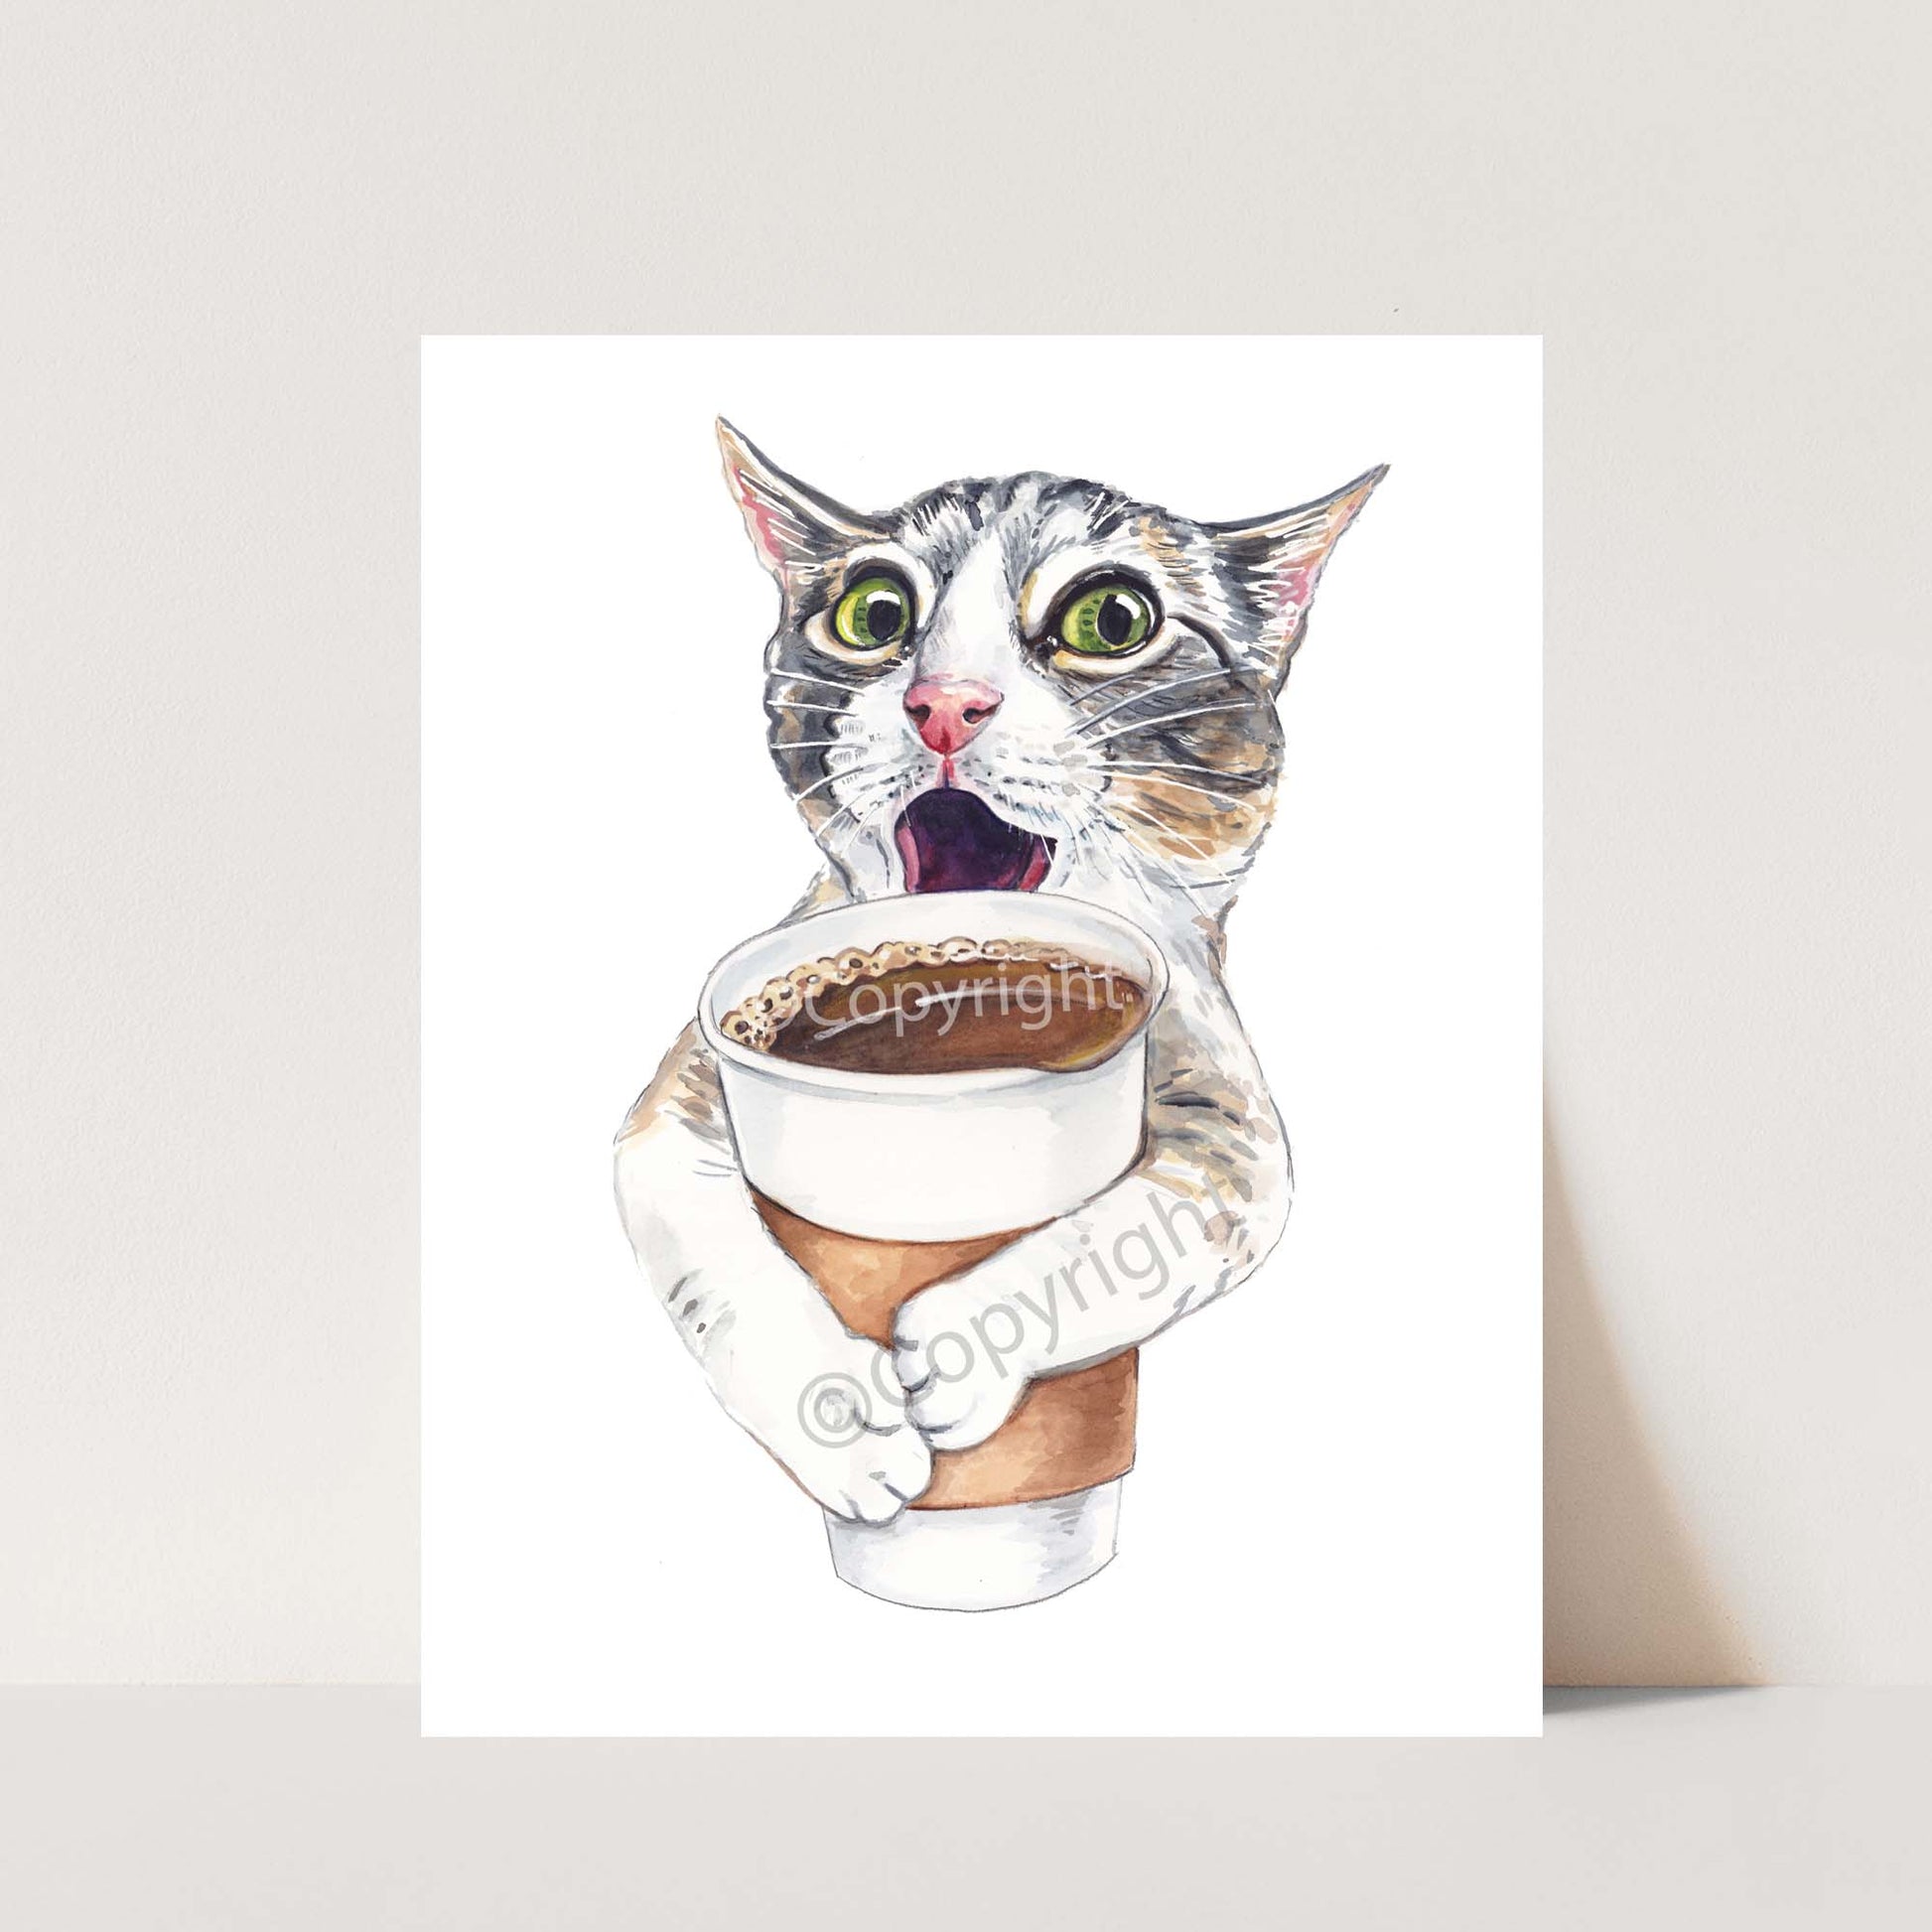 Watercolour painting of an excited tabby cat holding a large cup of coffee. Art by Deidre Wicks